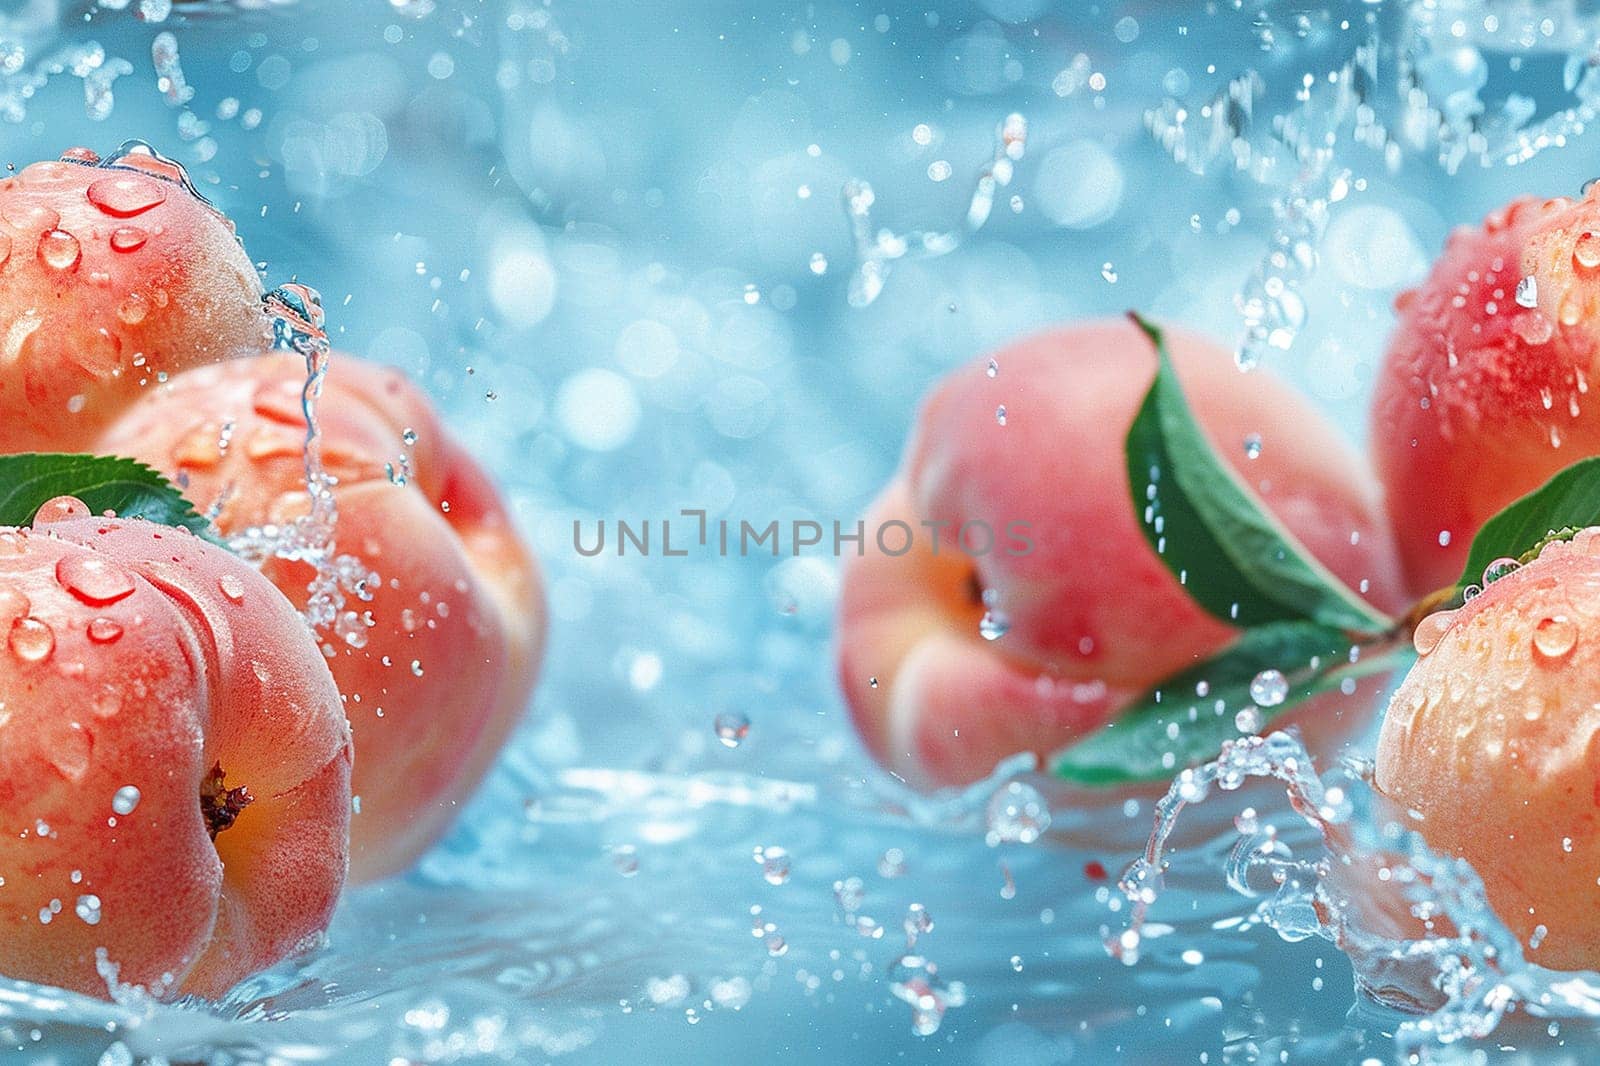 Ripe juicy peaches in a splash of water on a blue background. Fruits in crystal clear water with air bubbles.